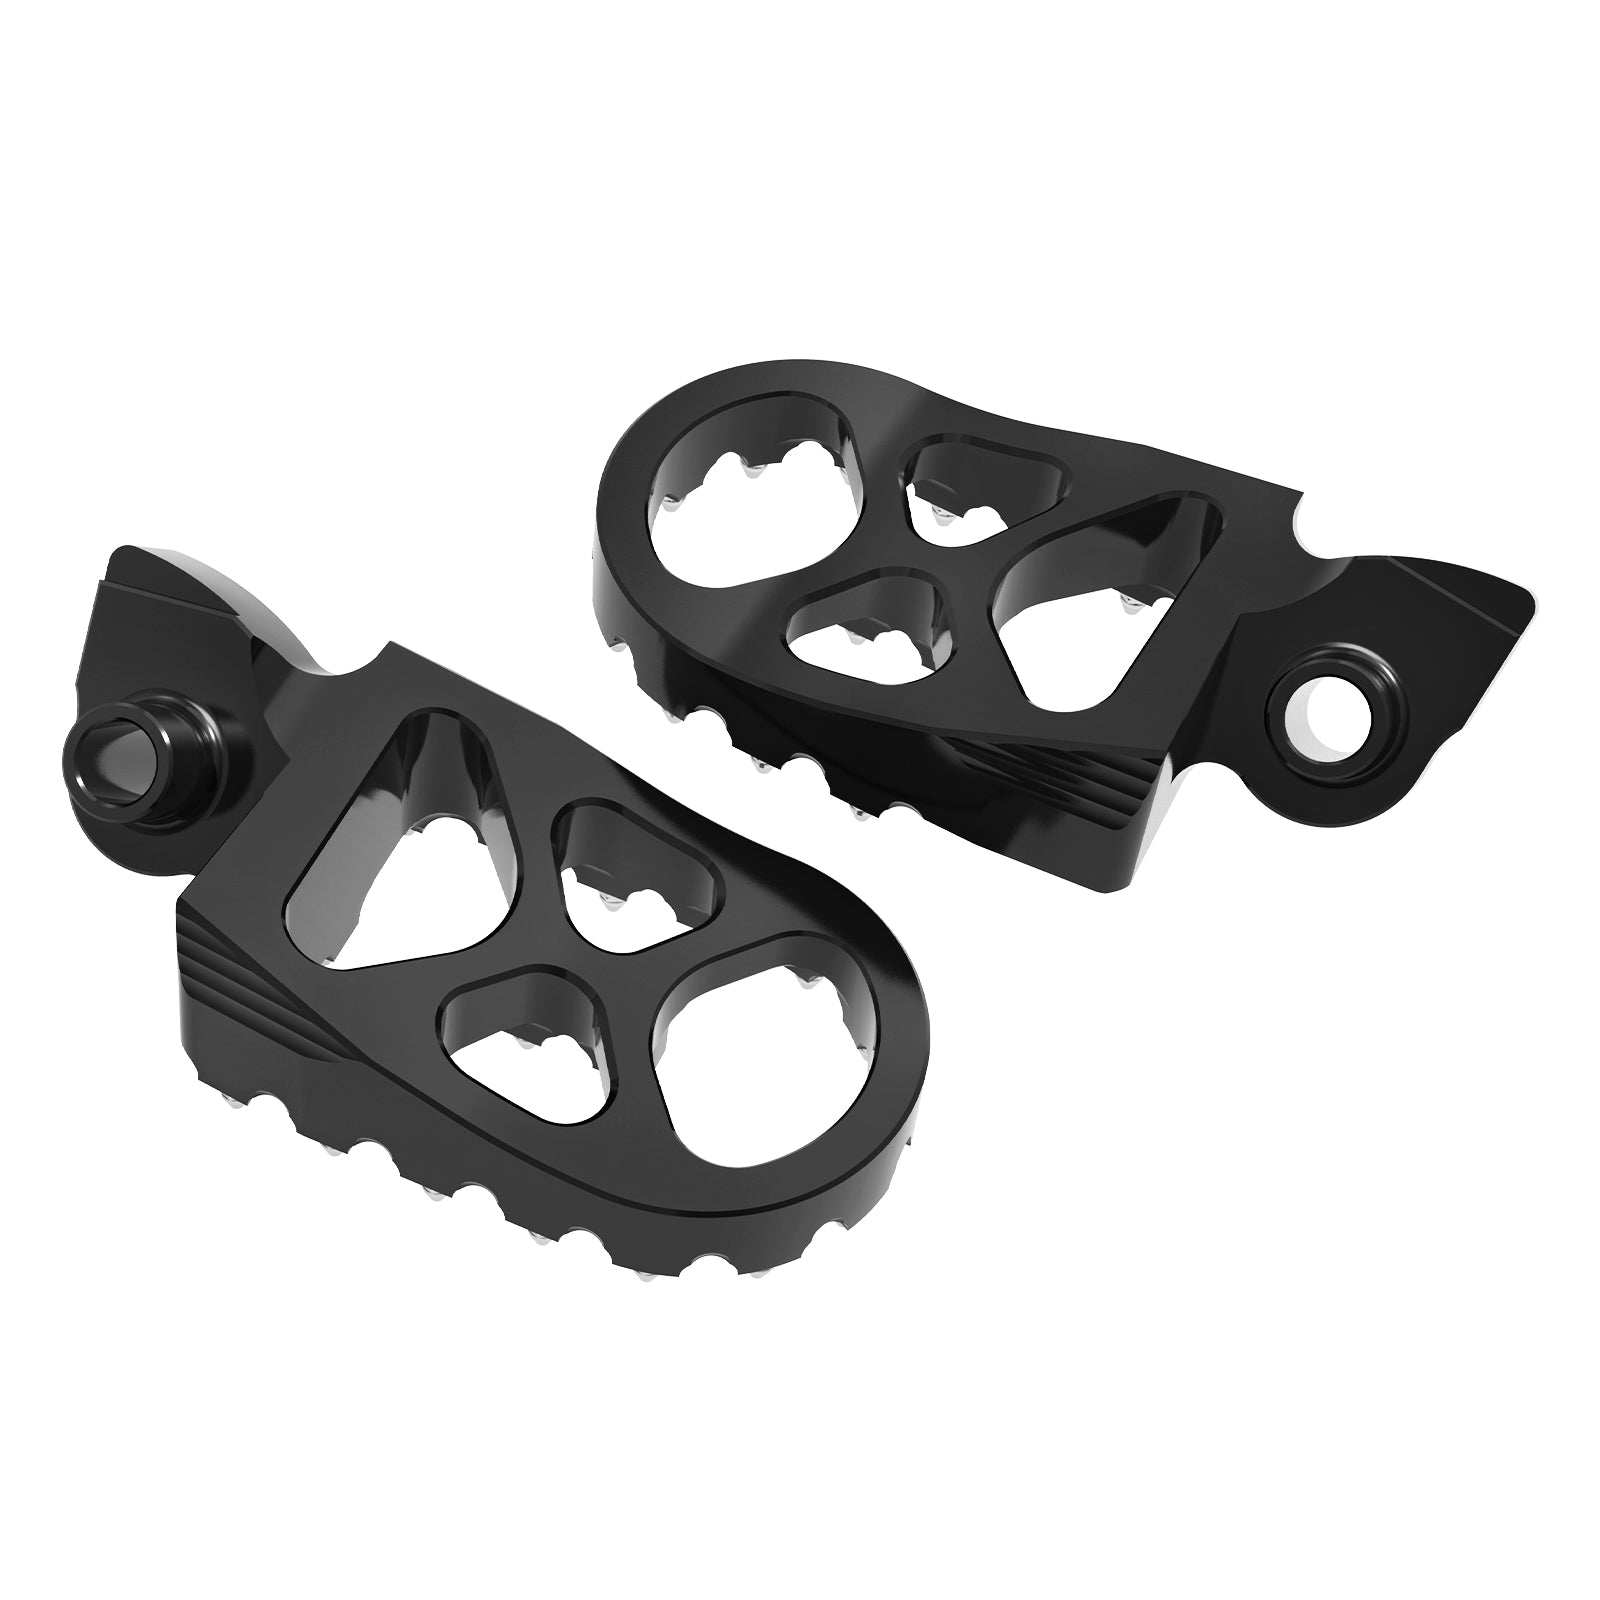 Wide Forged Motorcycle Foot Pegs Pedal For Yamaha YZ65 YZ85 YZ125 YZ250 YZ450F WR250F